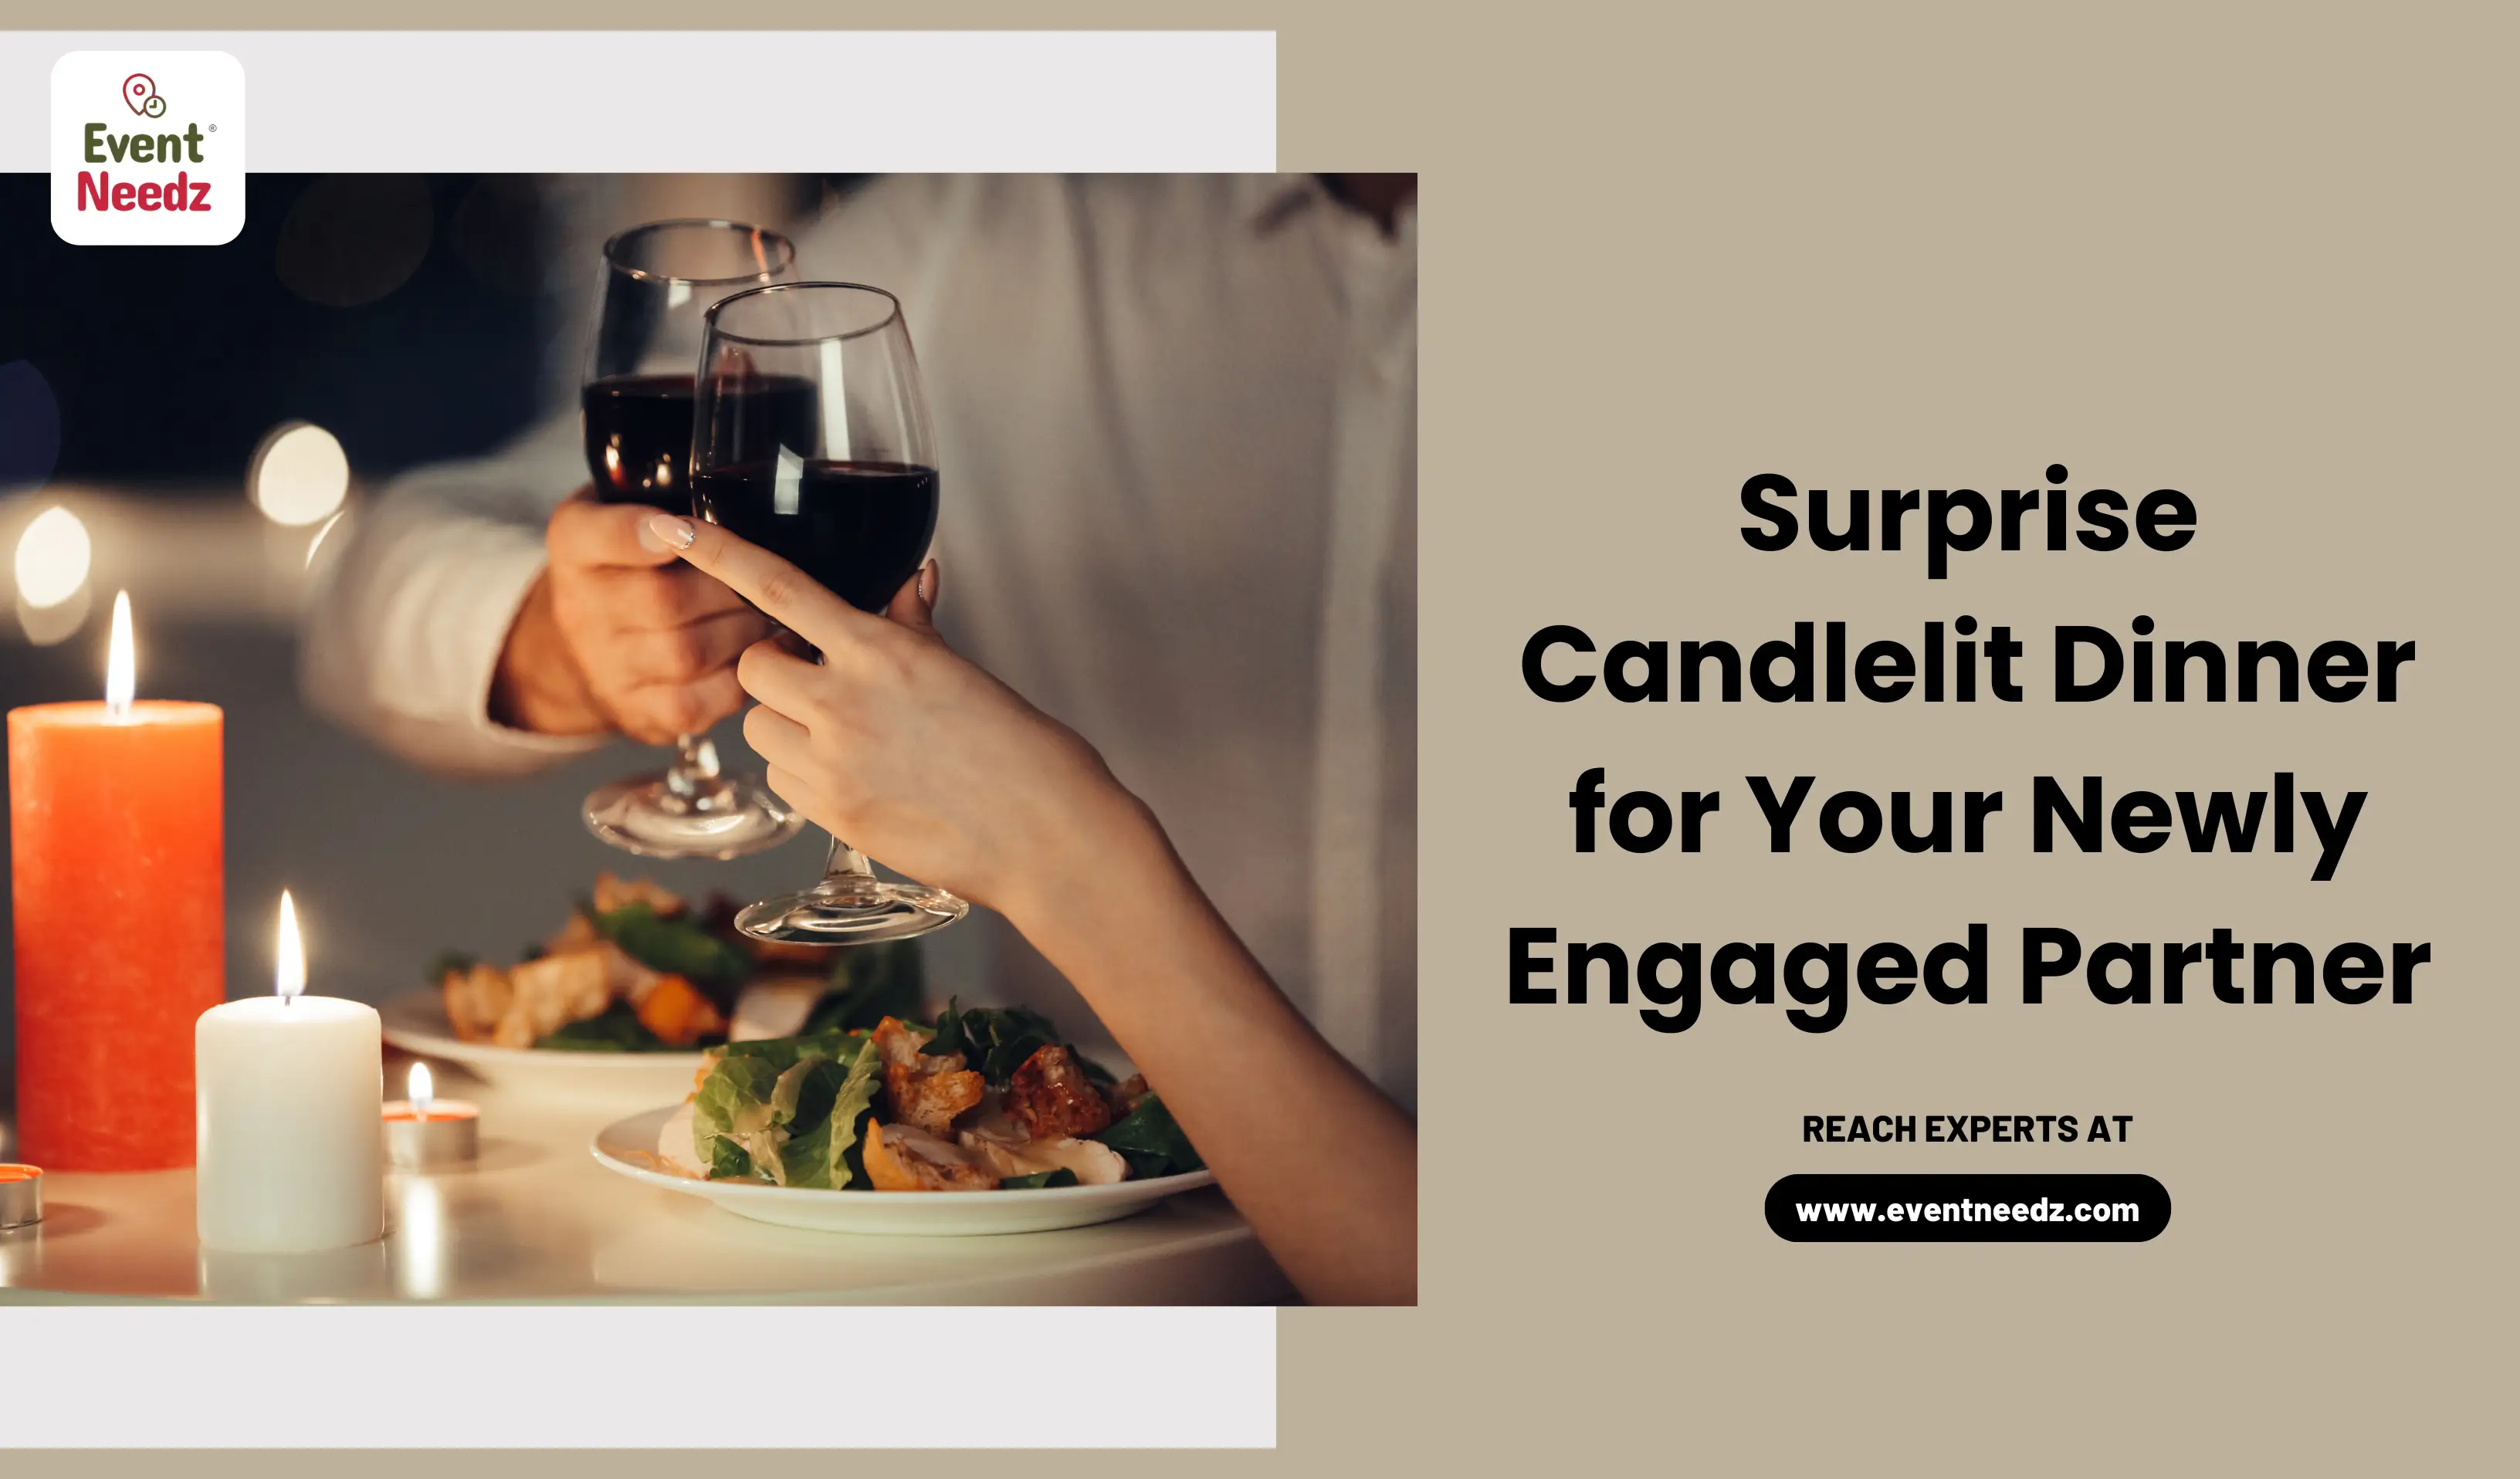 Surprise Candlelit Dinner for Your Newly Engaged Partner